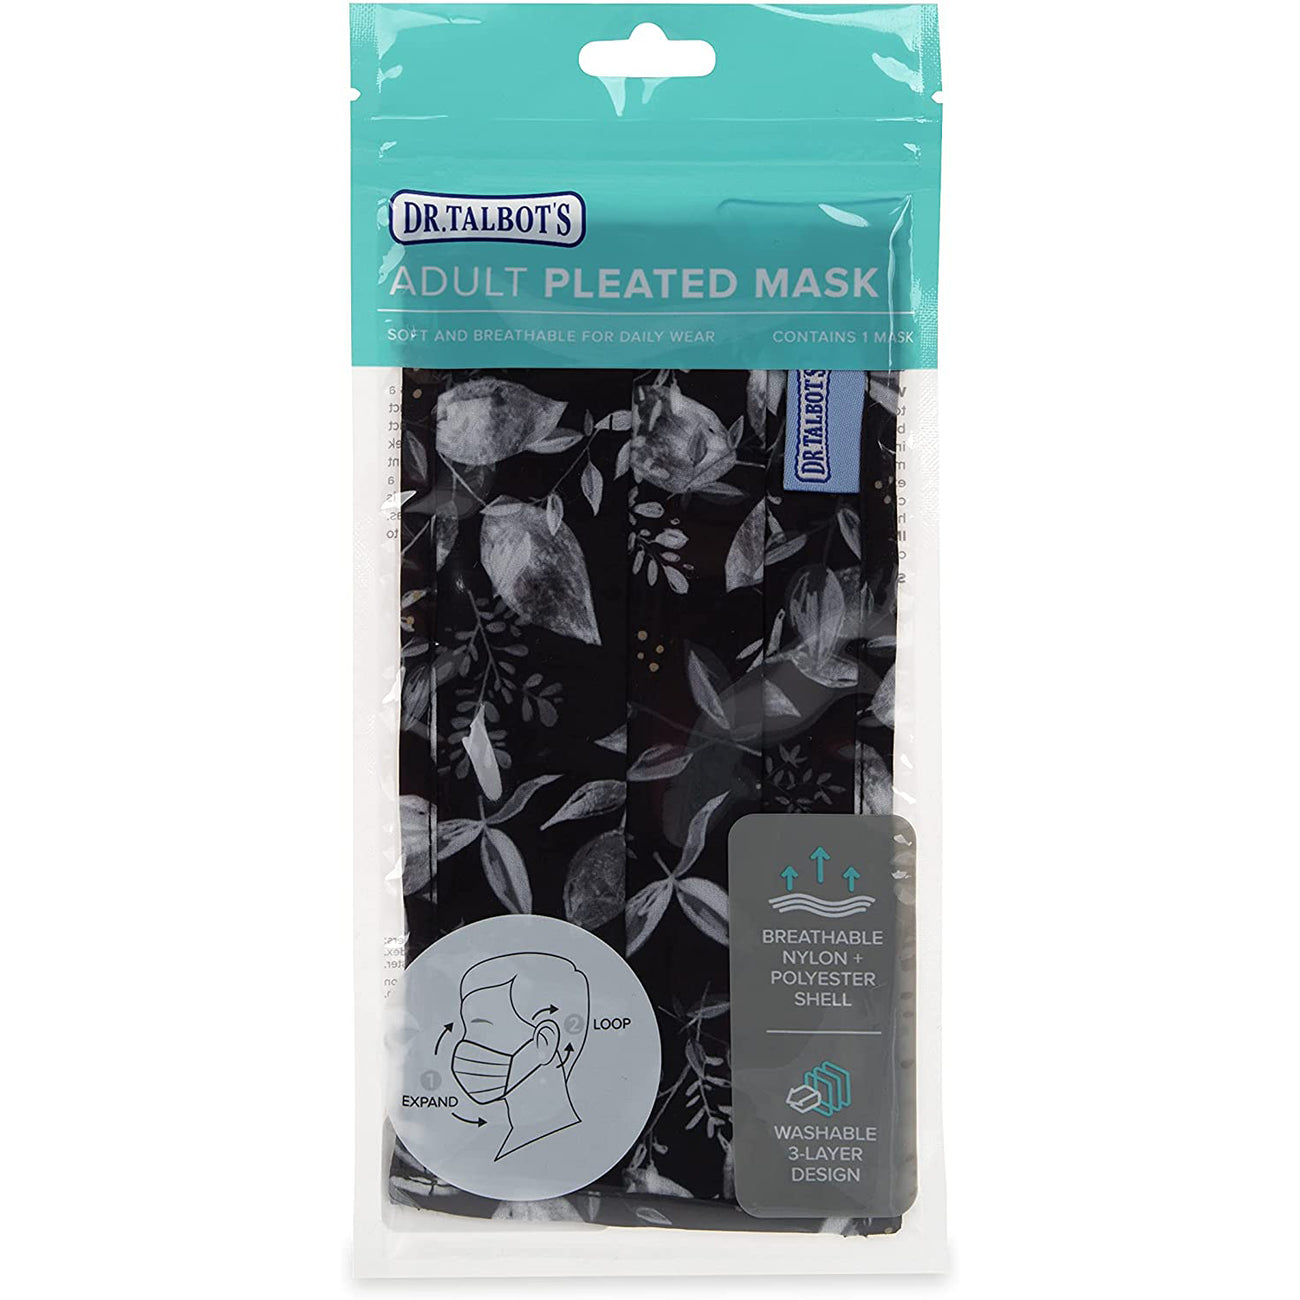 Adult Pleated Cloth Mask - 1 pack - White Leaves on Black - Dr Talbot's US